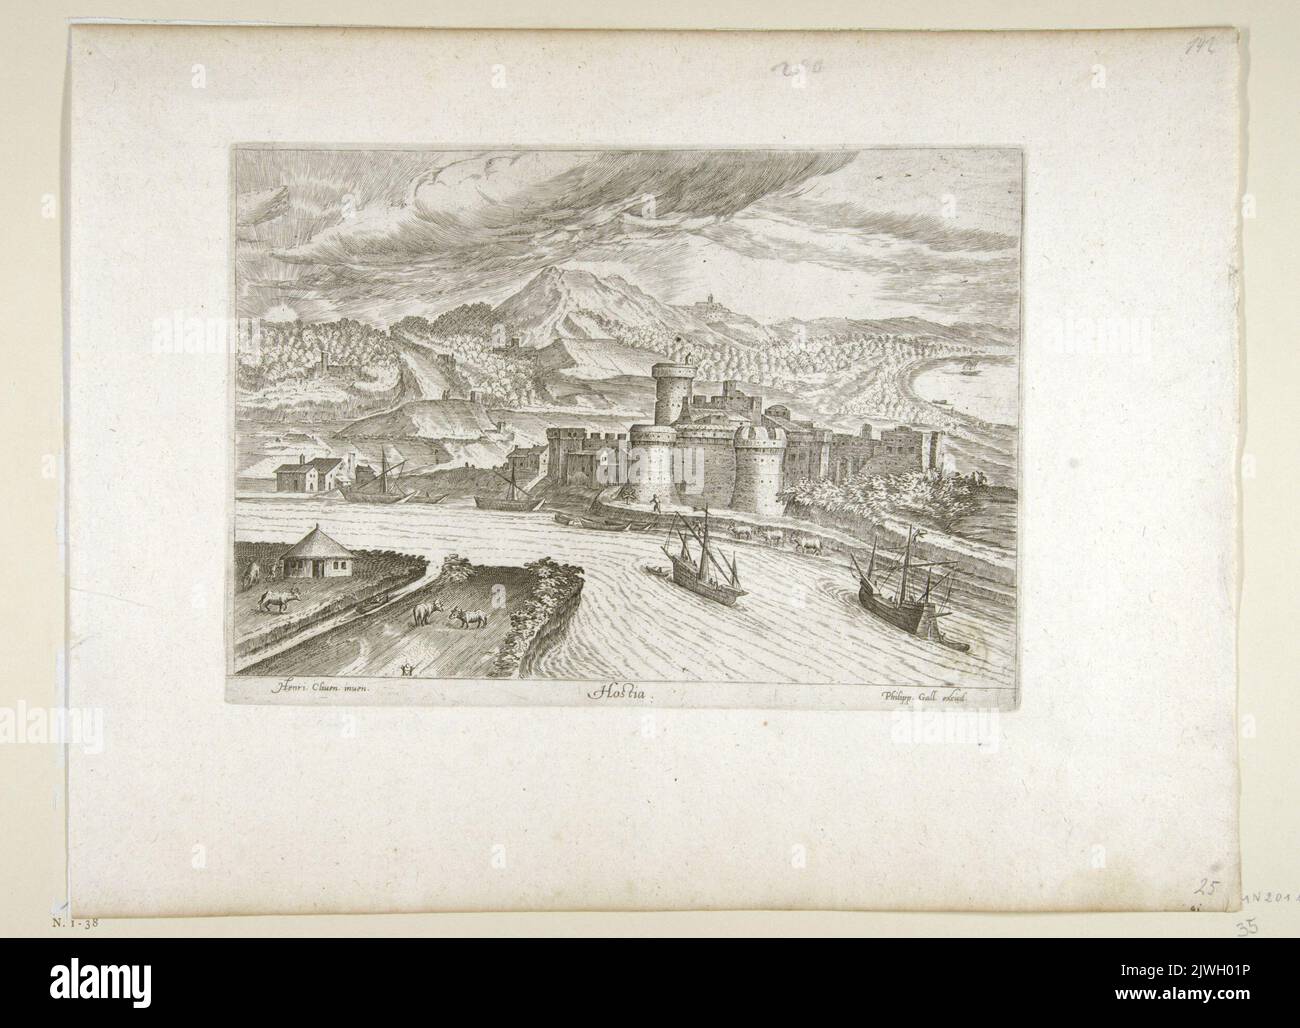 Ostia, view of the fortified castle on the bank of the Tiber. `Hostia`. Galle, Theodor (1571-1633), graphic artist, Galle, Philips (1537-1612), graphic artist, Cleve, Hendrick van, III (ca 1525-1589), draughtsman, cartoonist Stock Photo